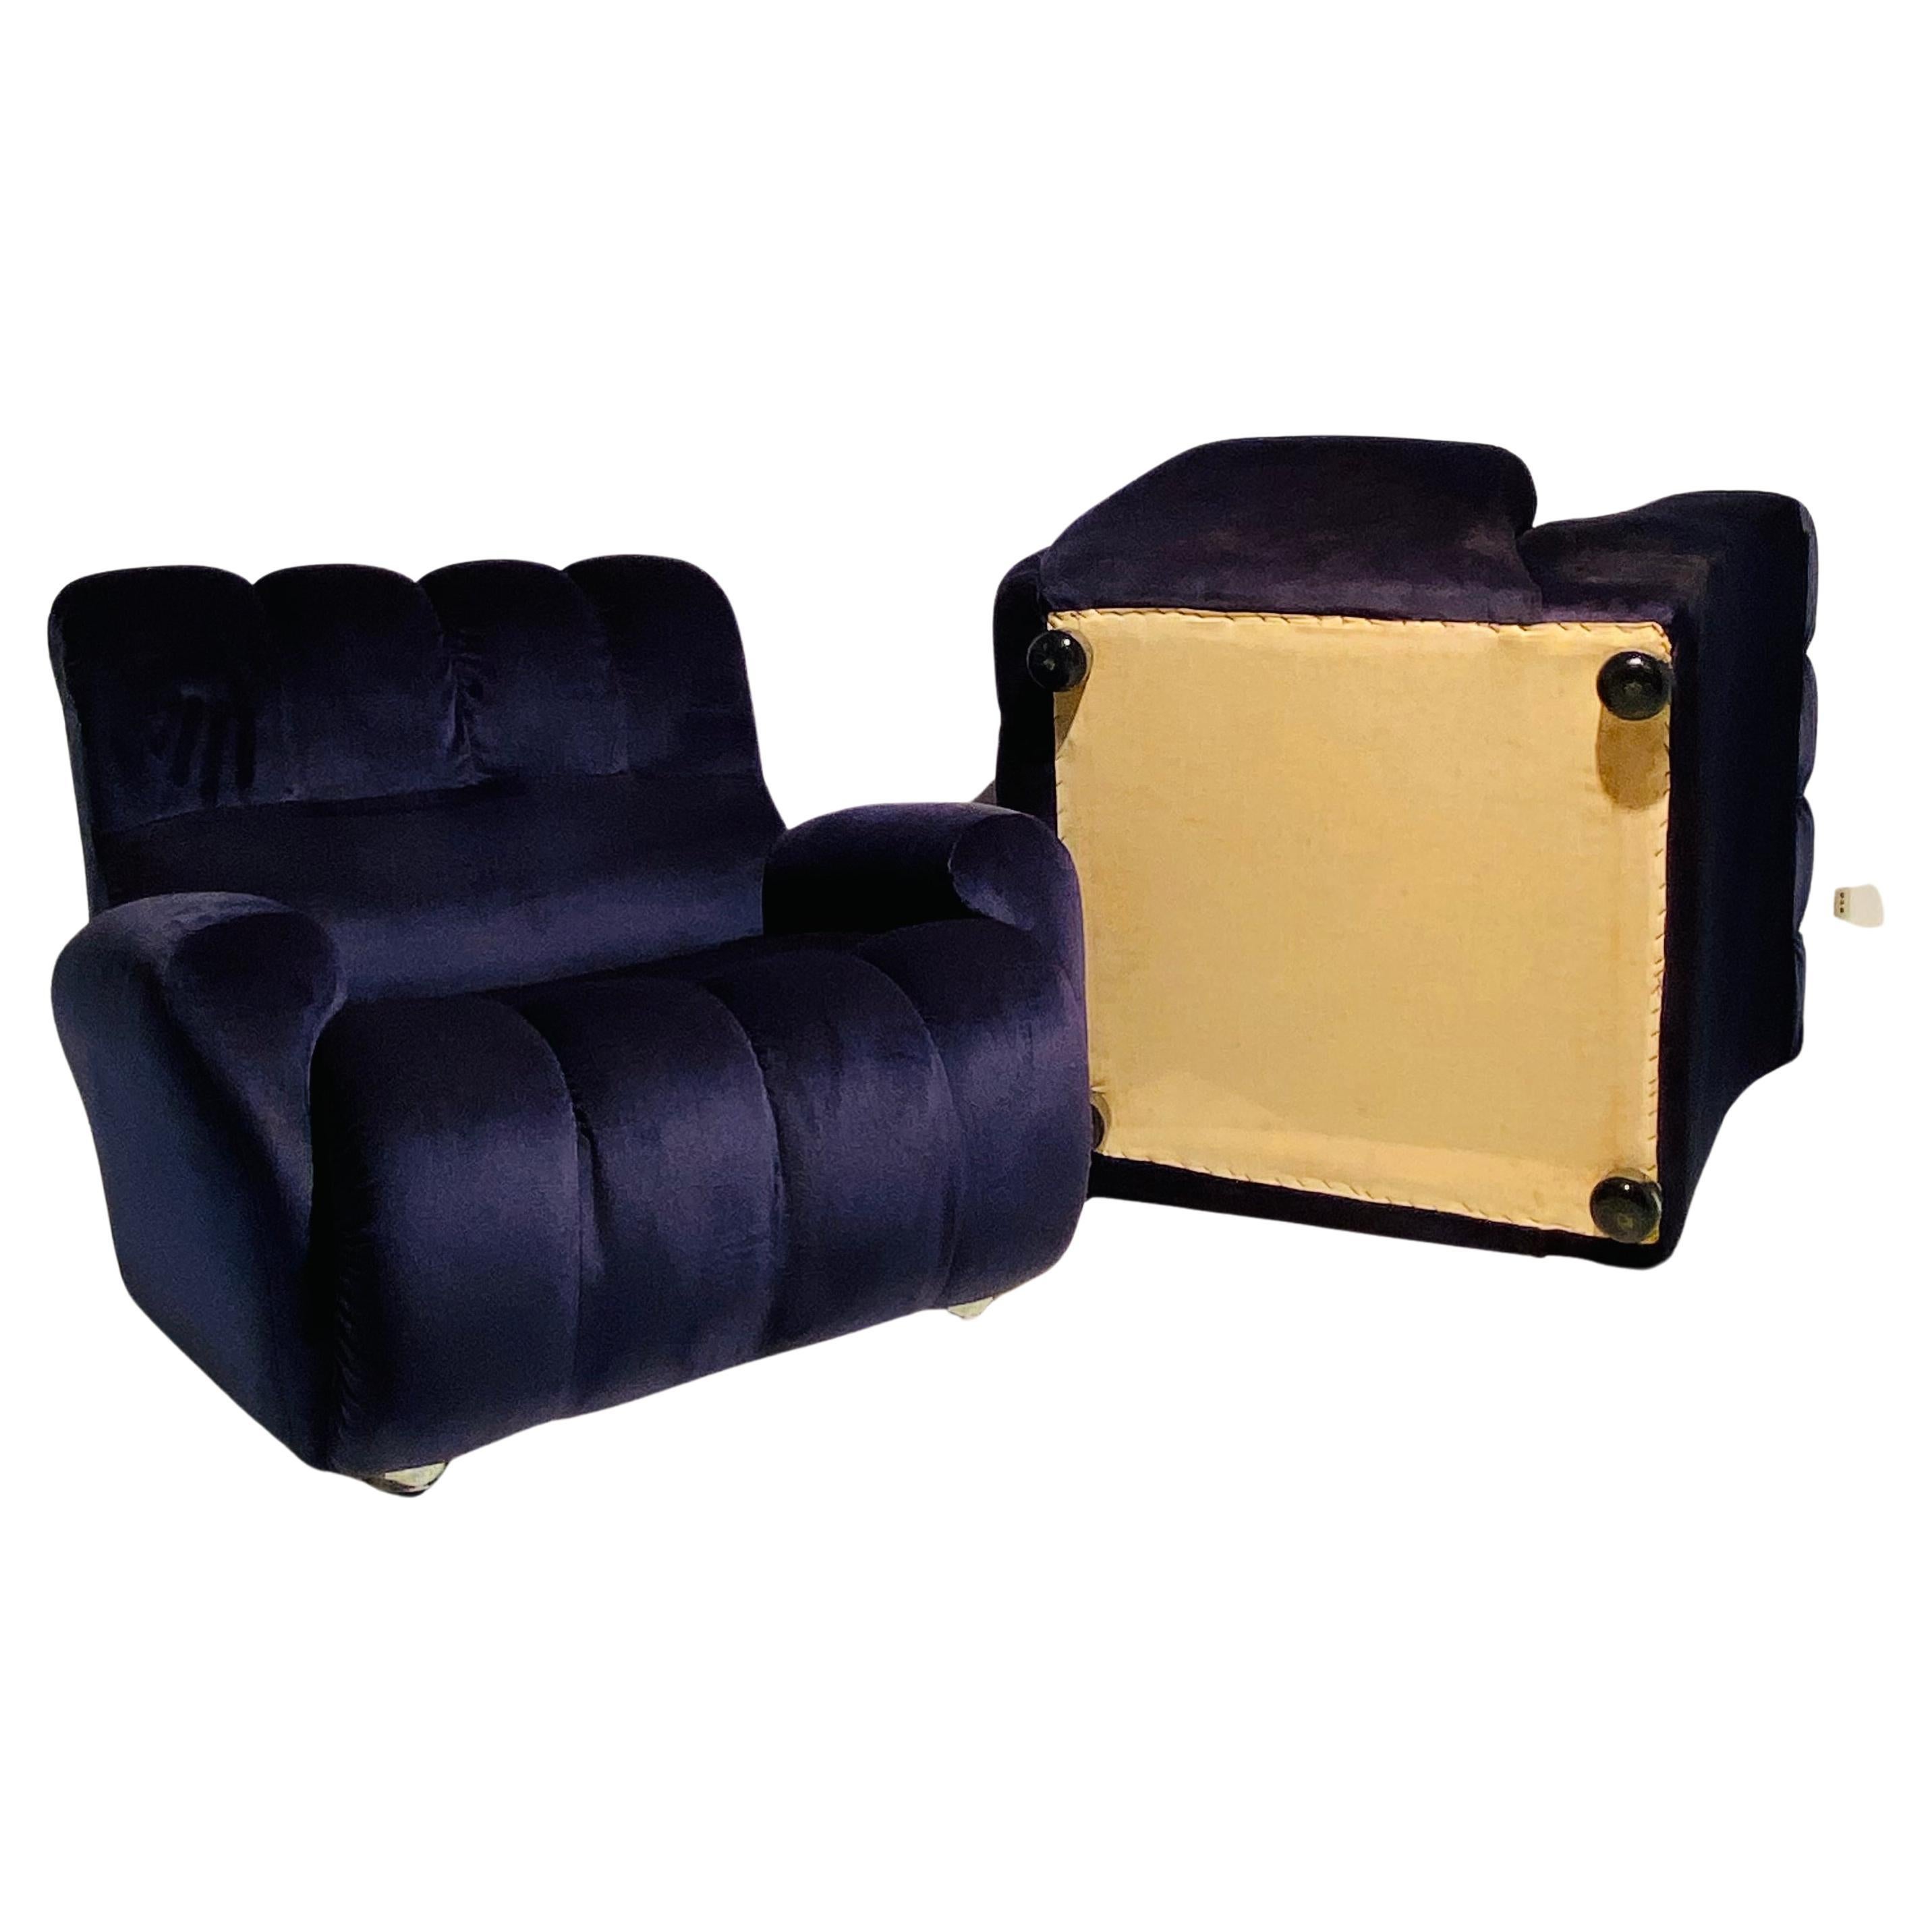 20th Century Midcentury Modern Blue Velvet Armchairs, Set of Two, Italy 1980s For Sale